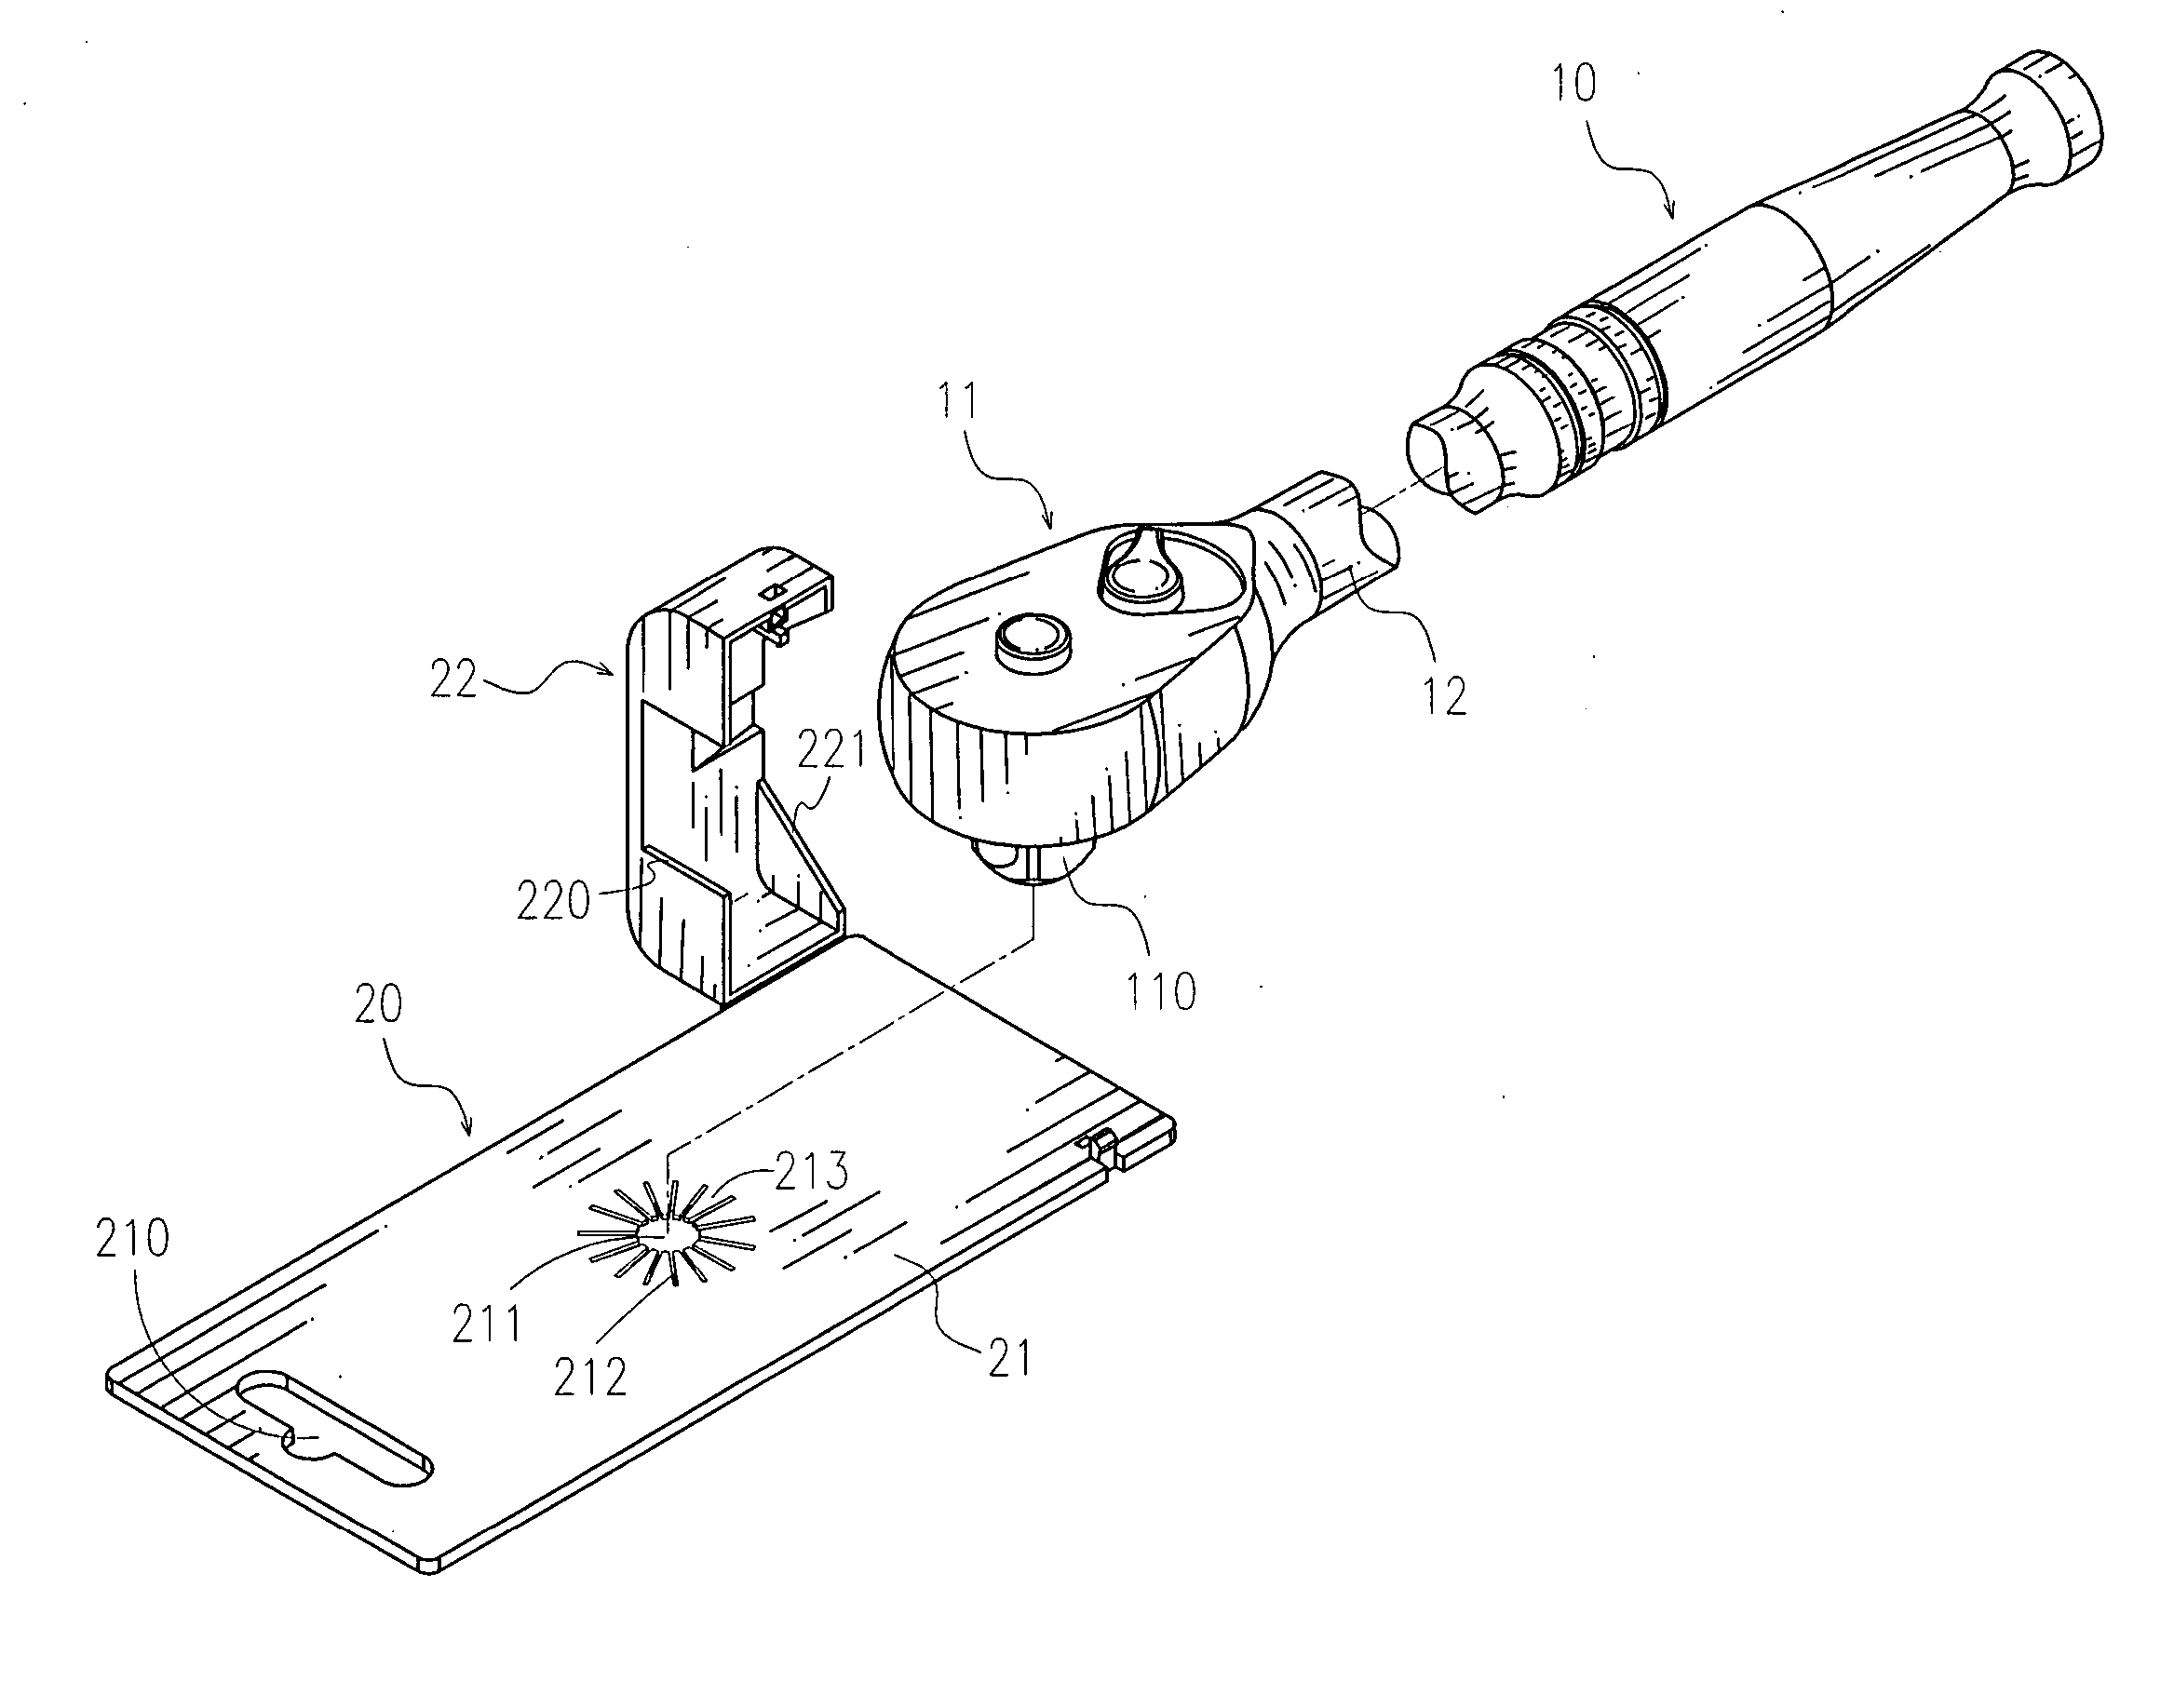 Tool display rack having holding and rotation test functions